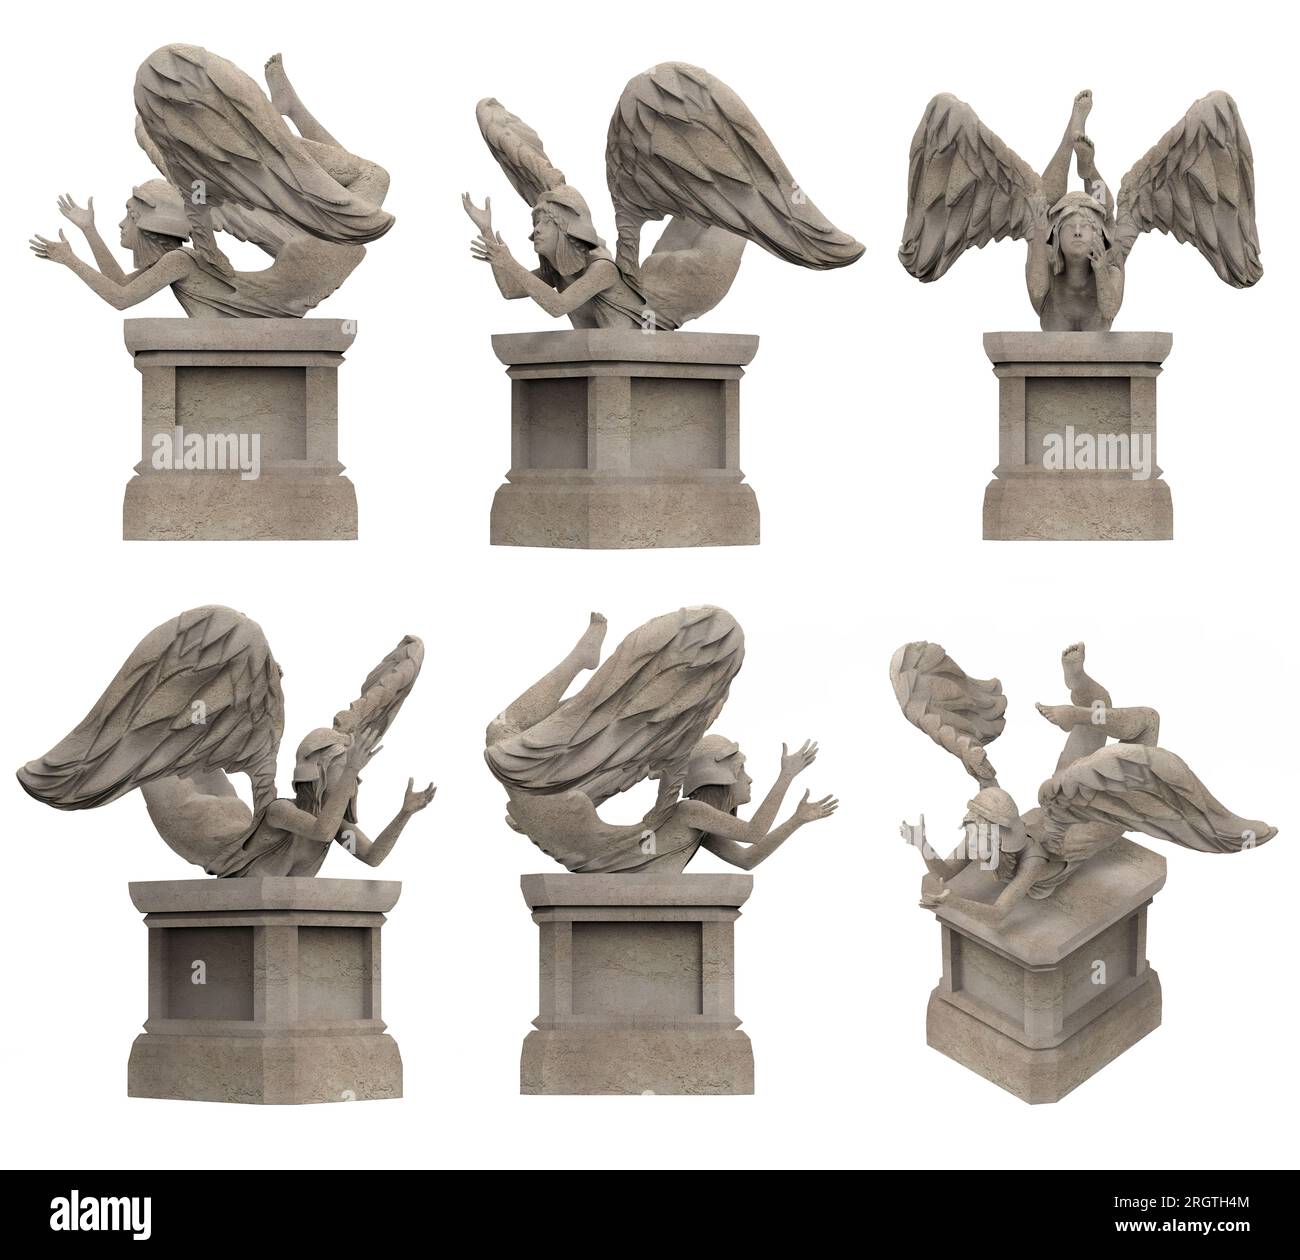 Isolated 3d render illustration of antique ancient stone female angel warrior statue on pedestal falling pose, various angles. Stock Photo